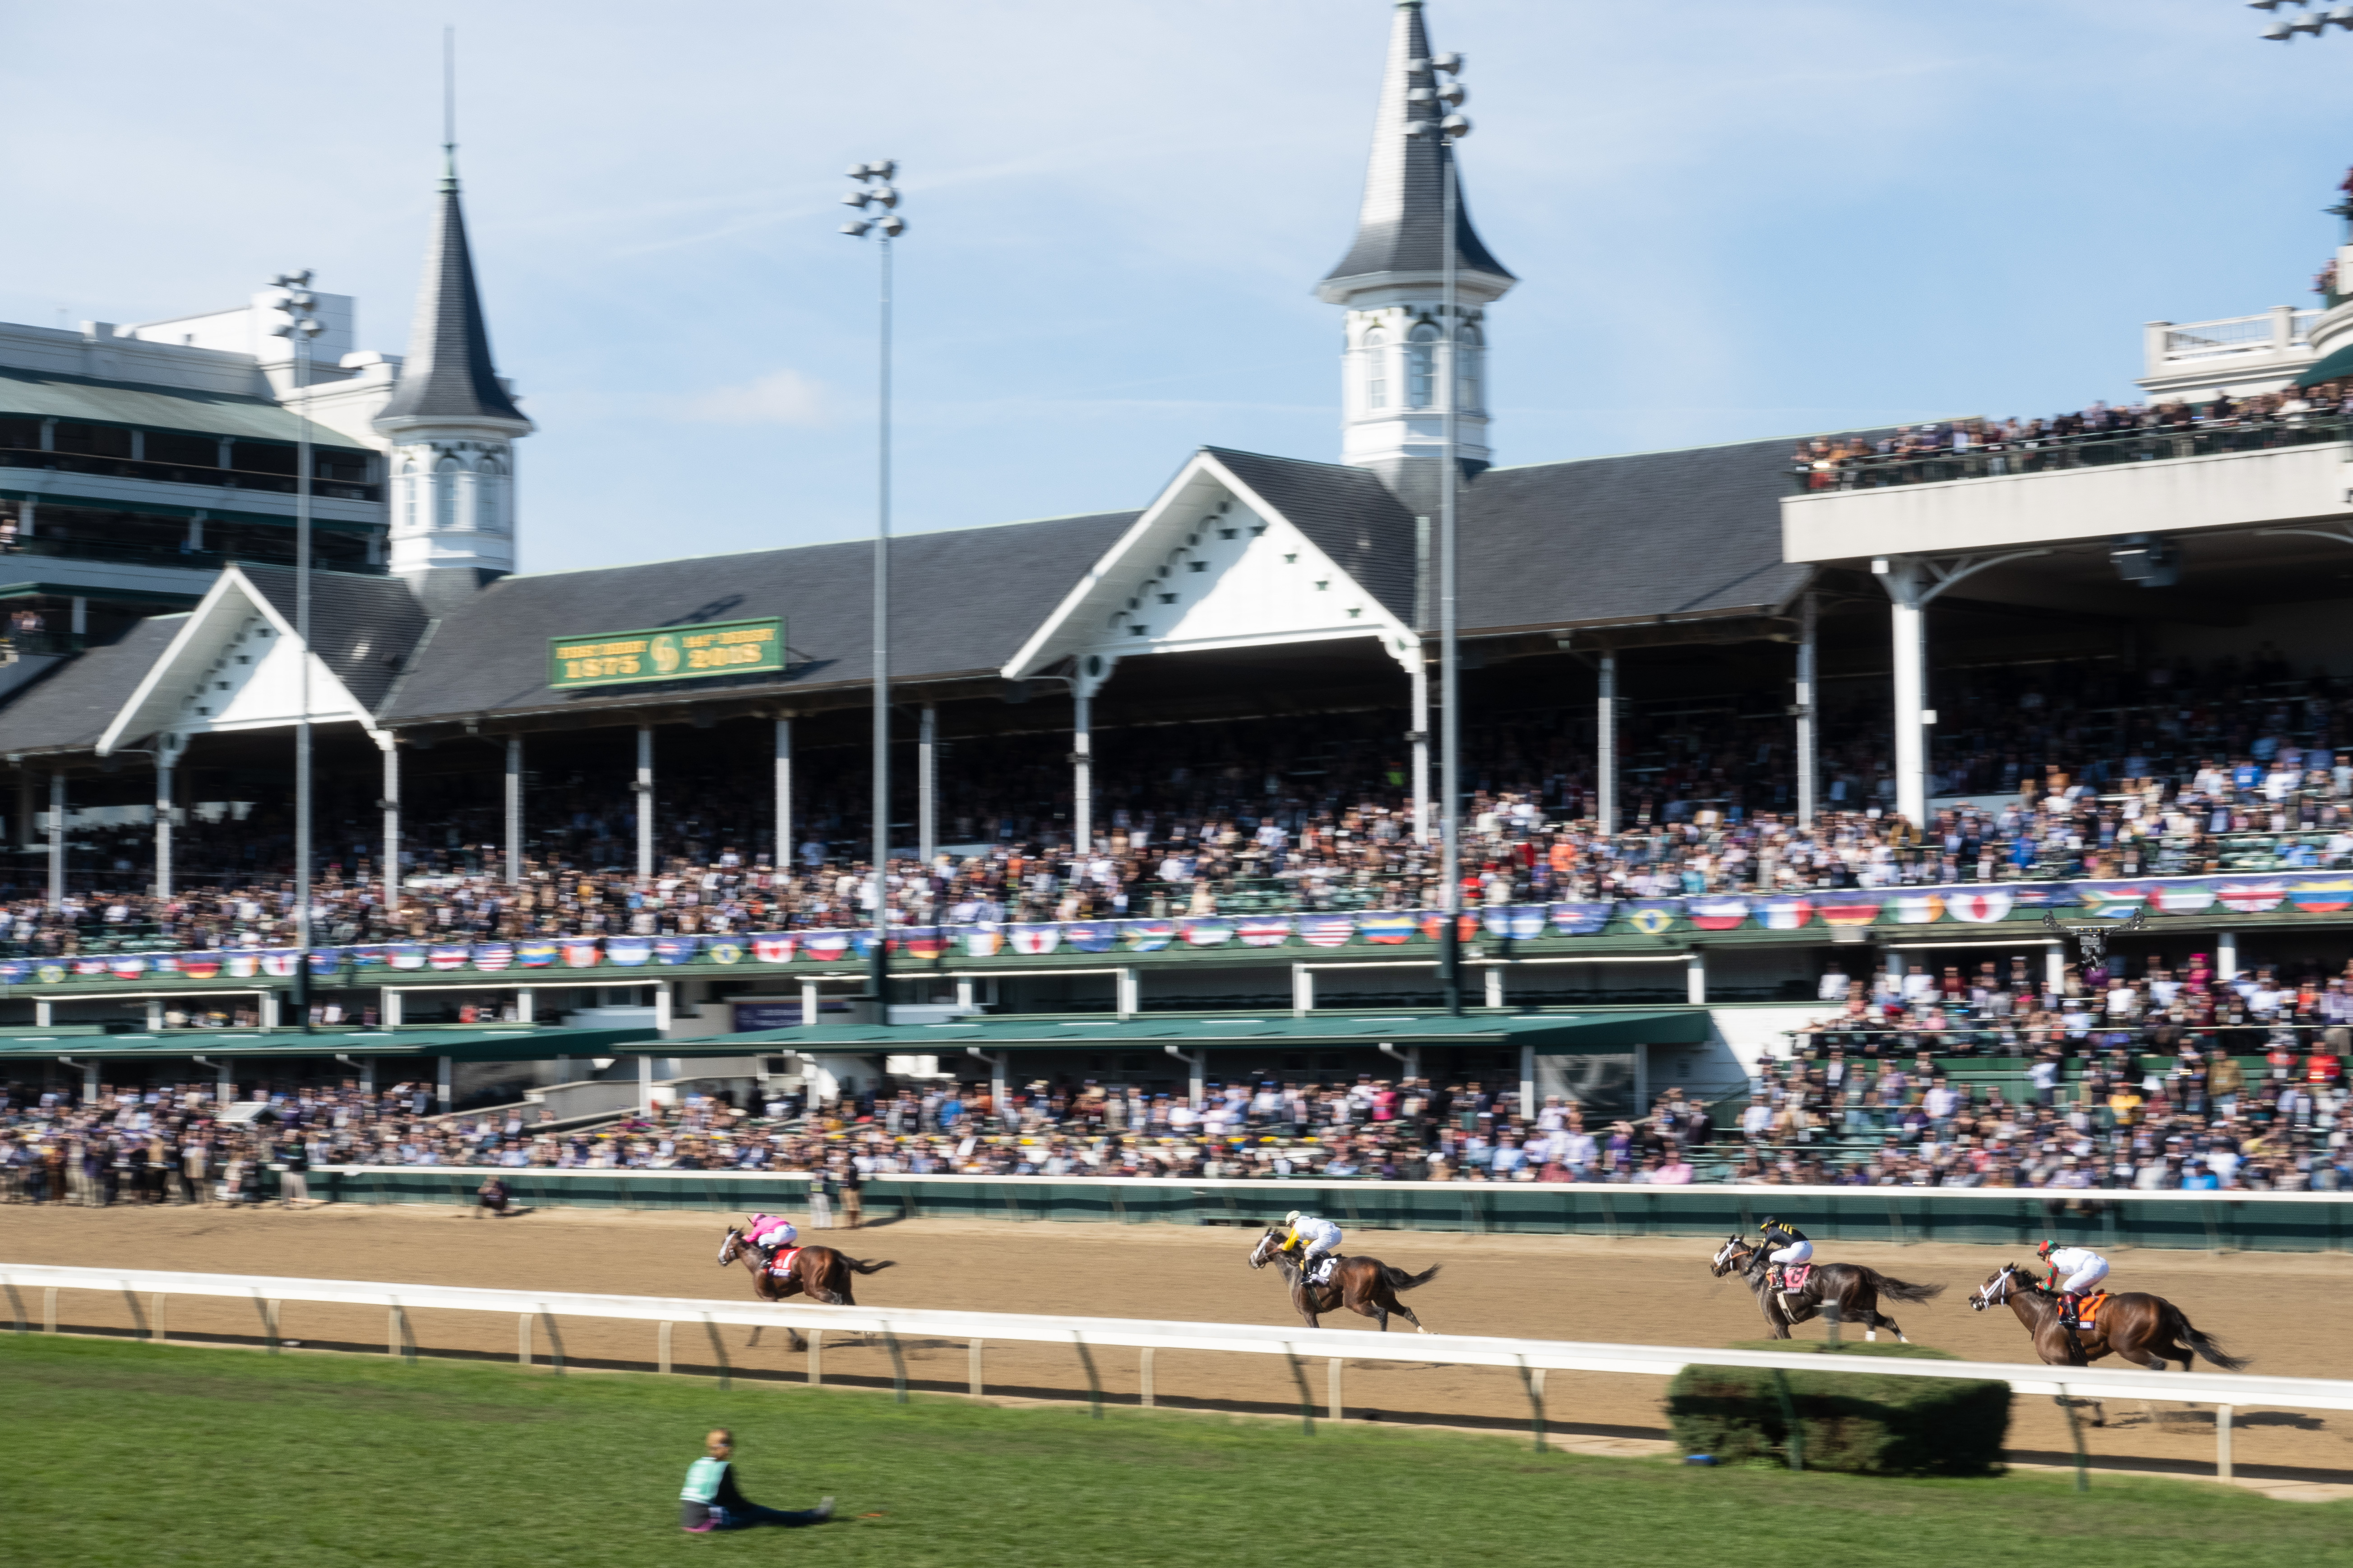 Checking out the Breeders Cup at Churchill Downs with Longines and Wrist Watch Review